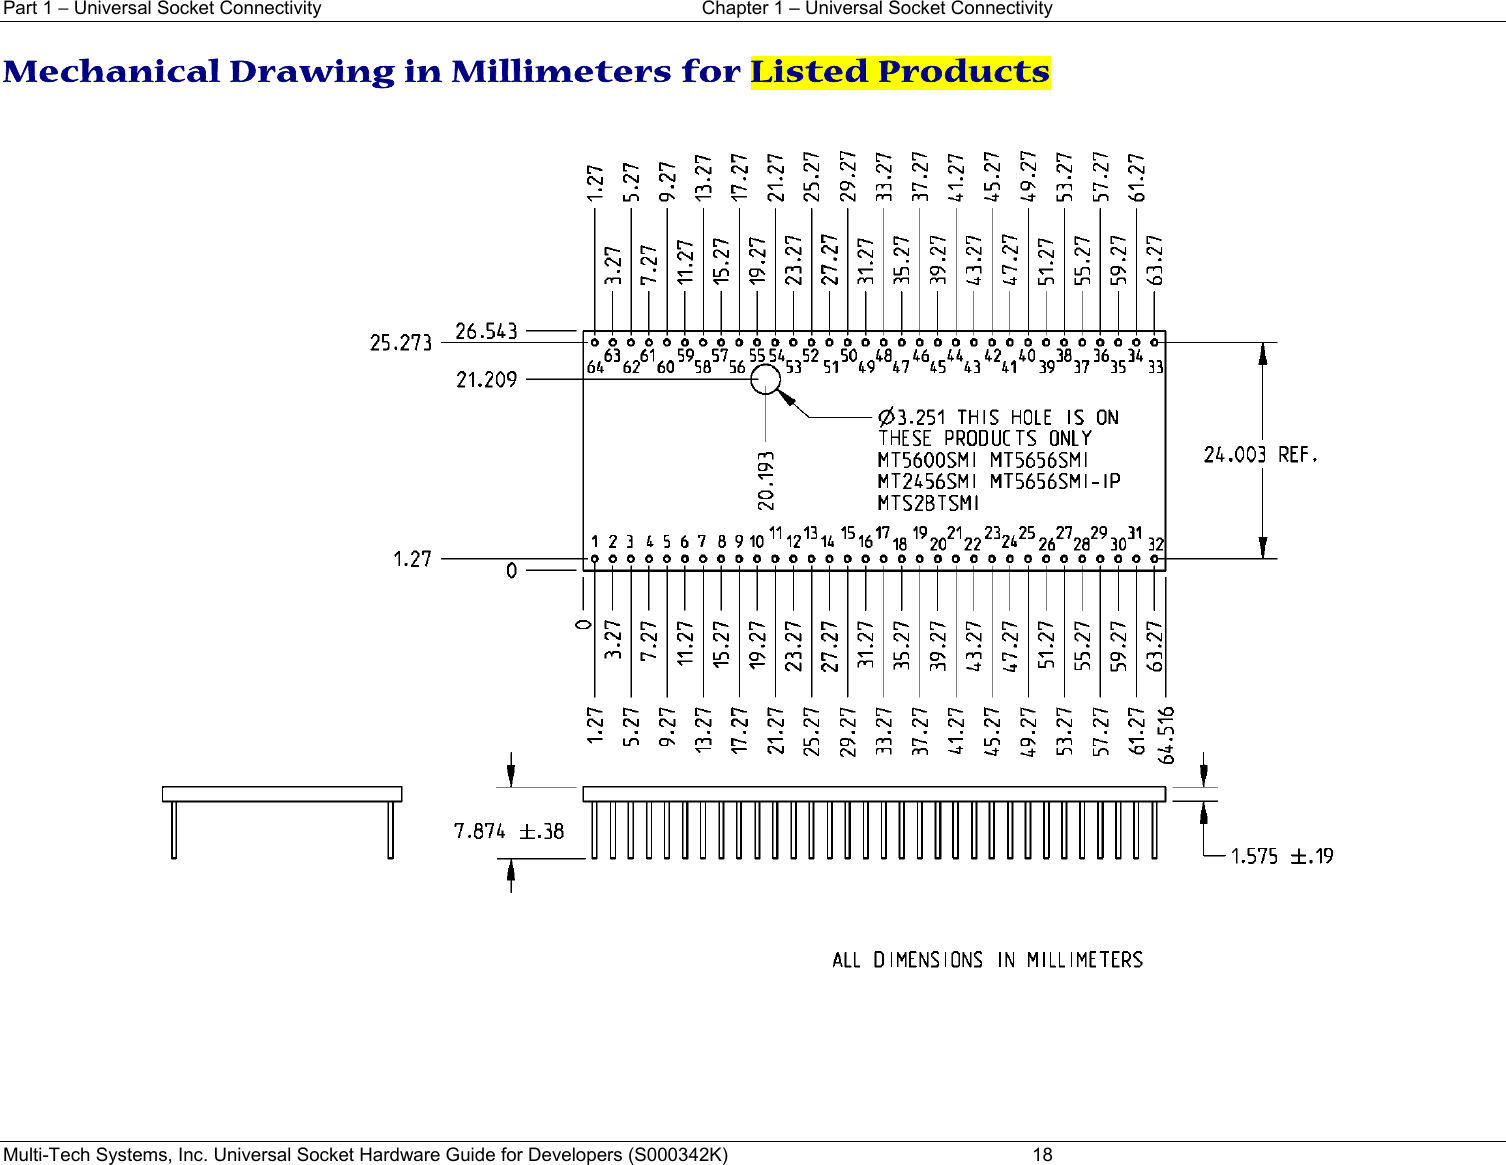 Part 1 − Universal Socket Connectivity    Chapter 1 – Universal Socket Connectivity Multi-Tech Systems, Inc. Universal Socket Hardware Guide for Developers (S000342K)  18 Mechanical Drawing in Millimeters for Listed Products 